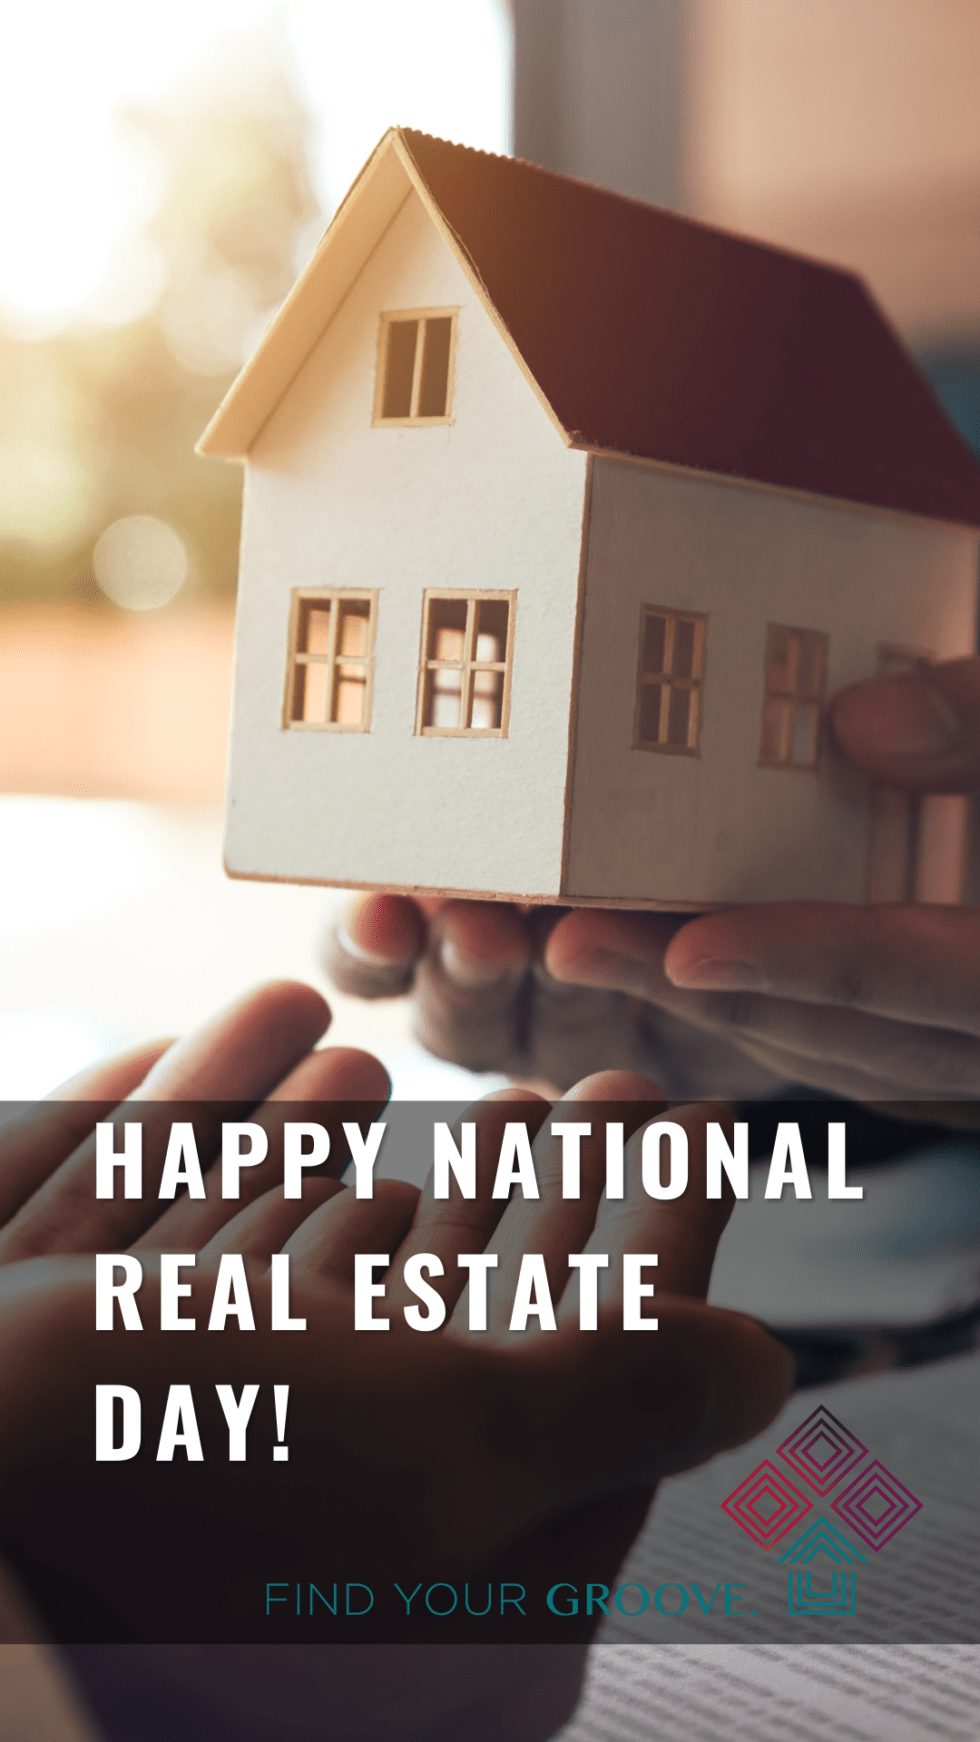 Happy National Real Estate Day! The Florian Realty Team